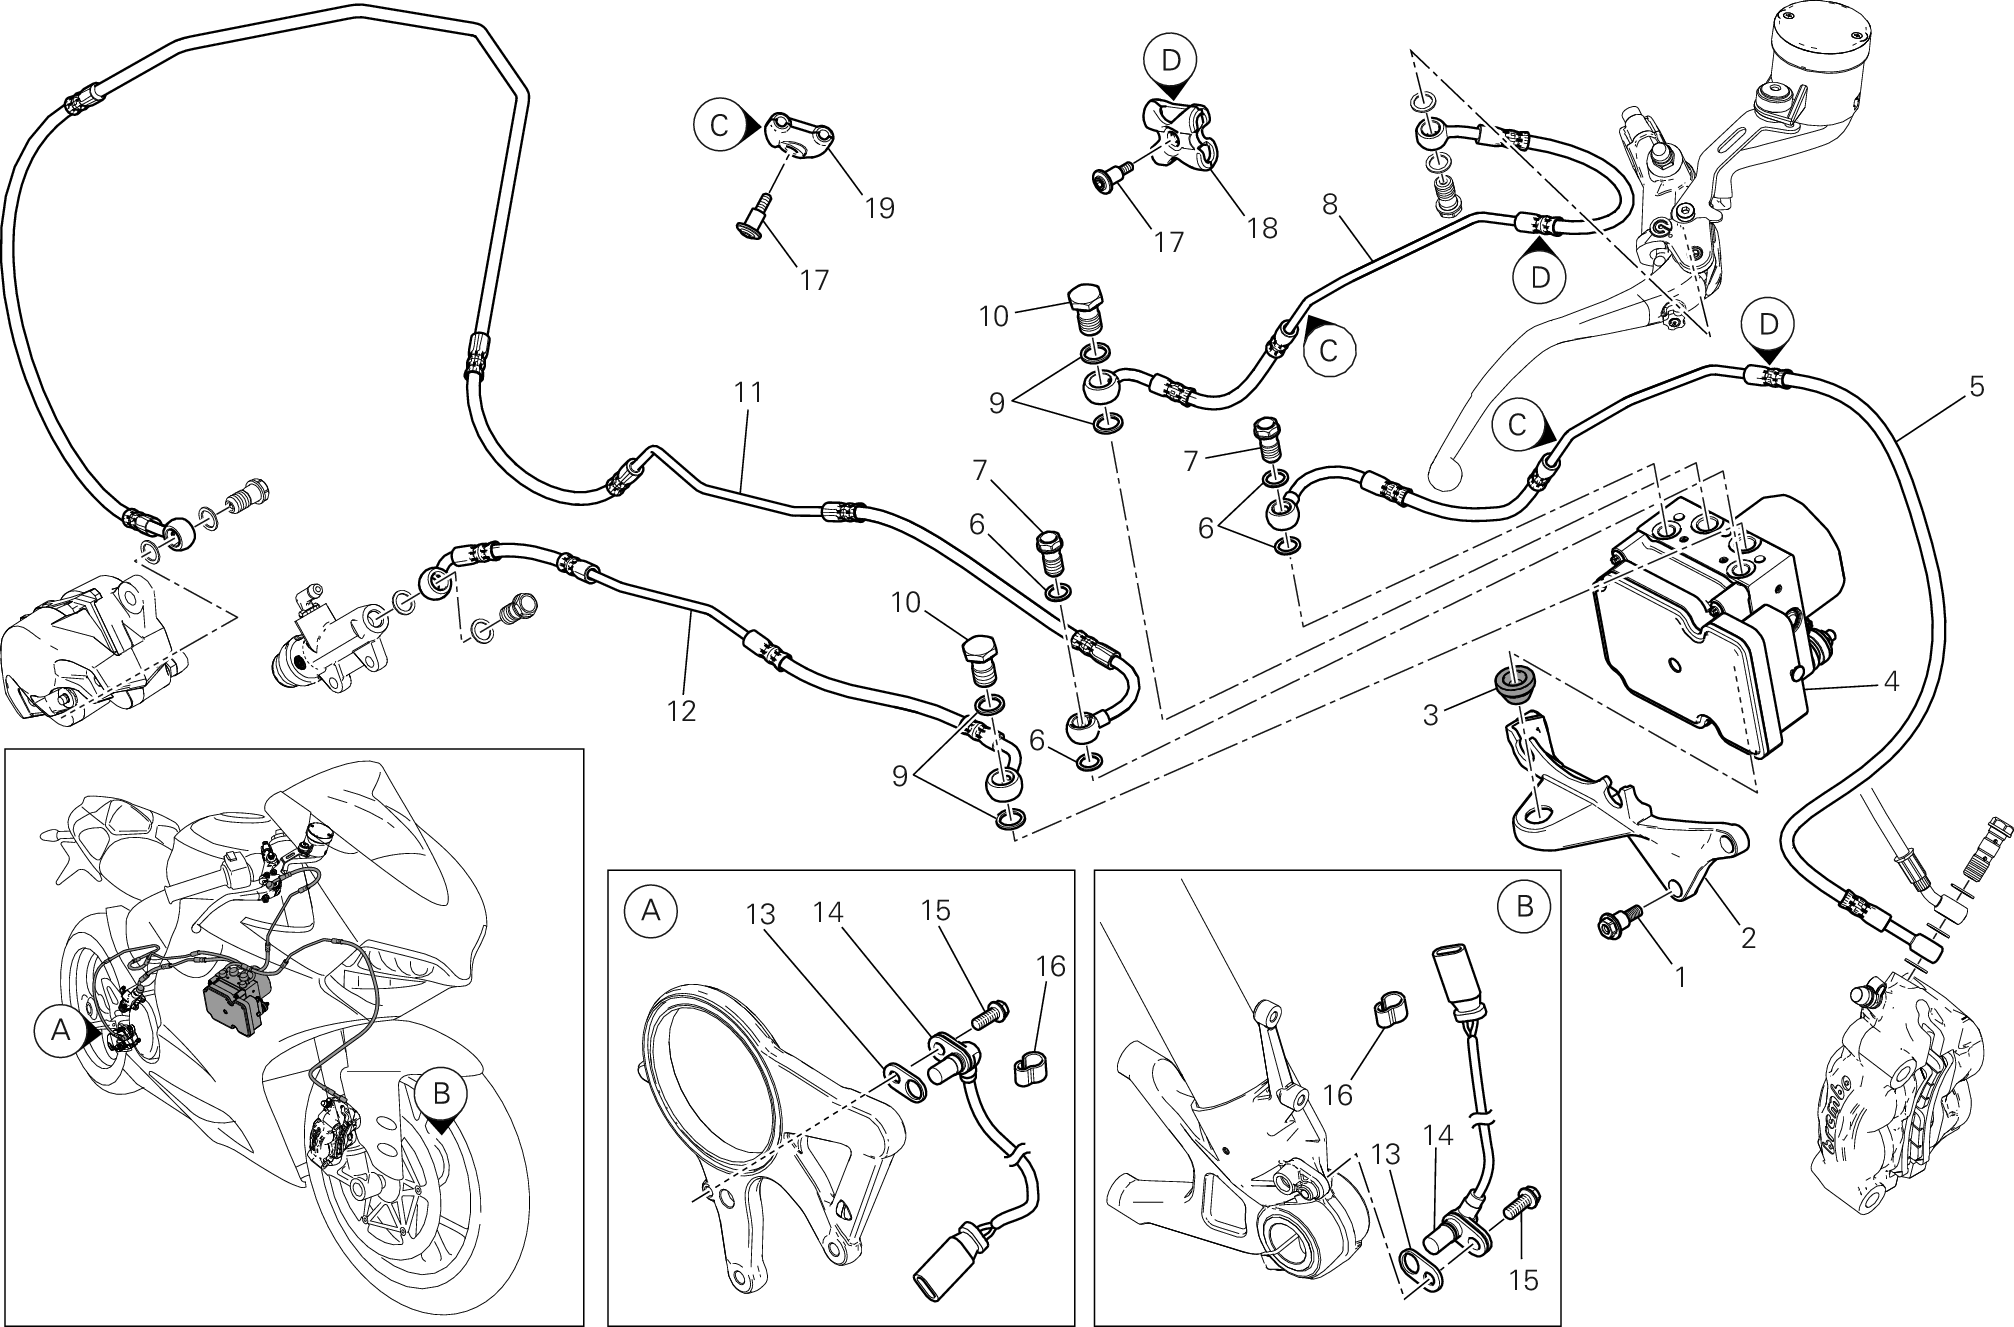 24A SYSTEME DE FREIN ABS POUR SUPERBIKE 1199 PANIGALE ABS 2012